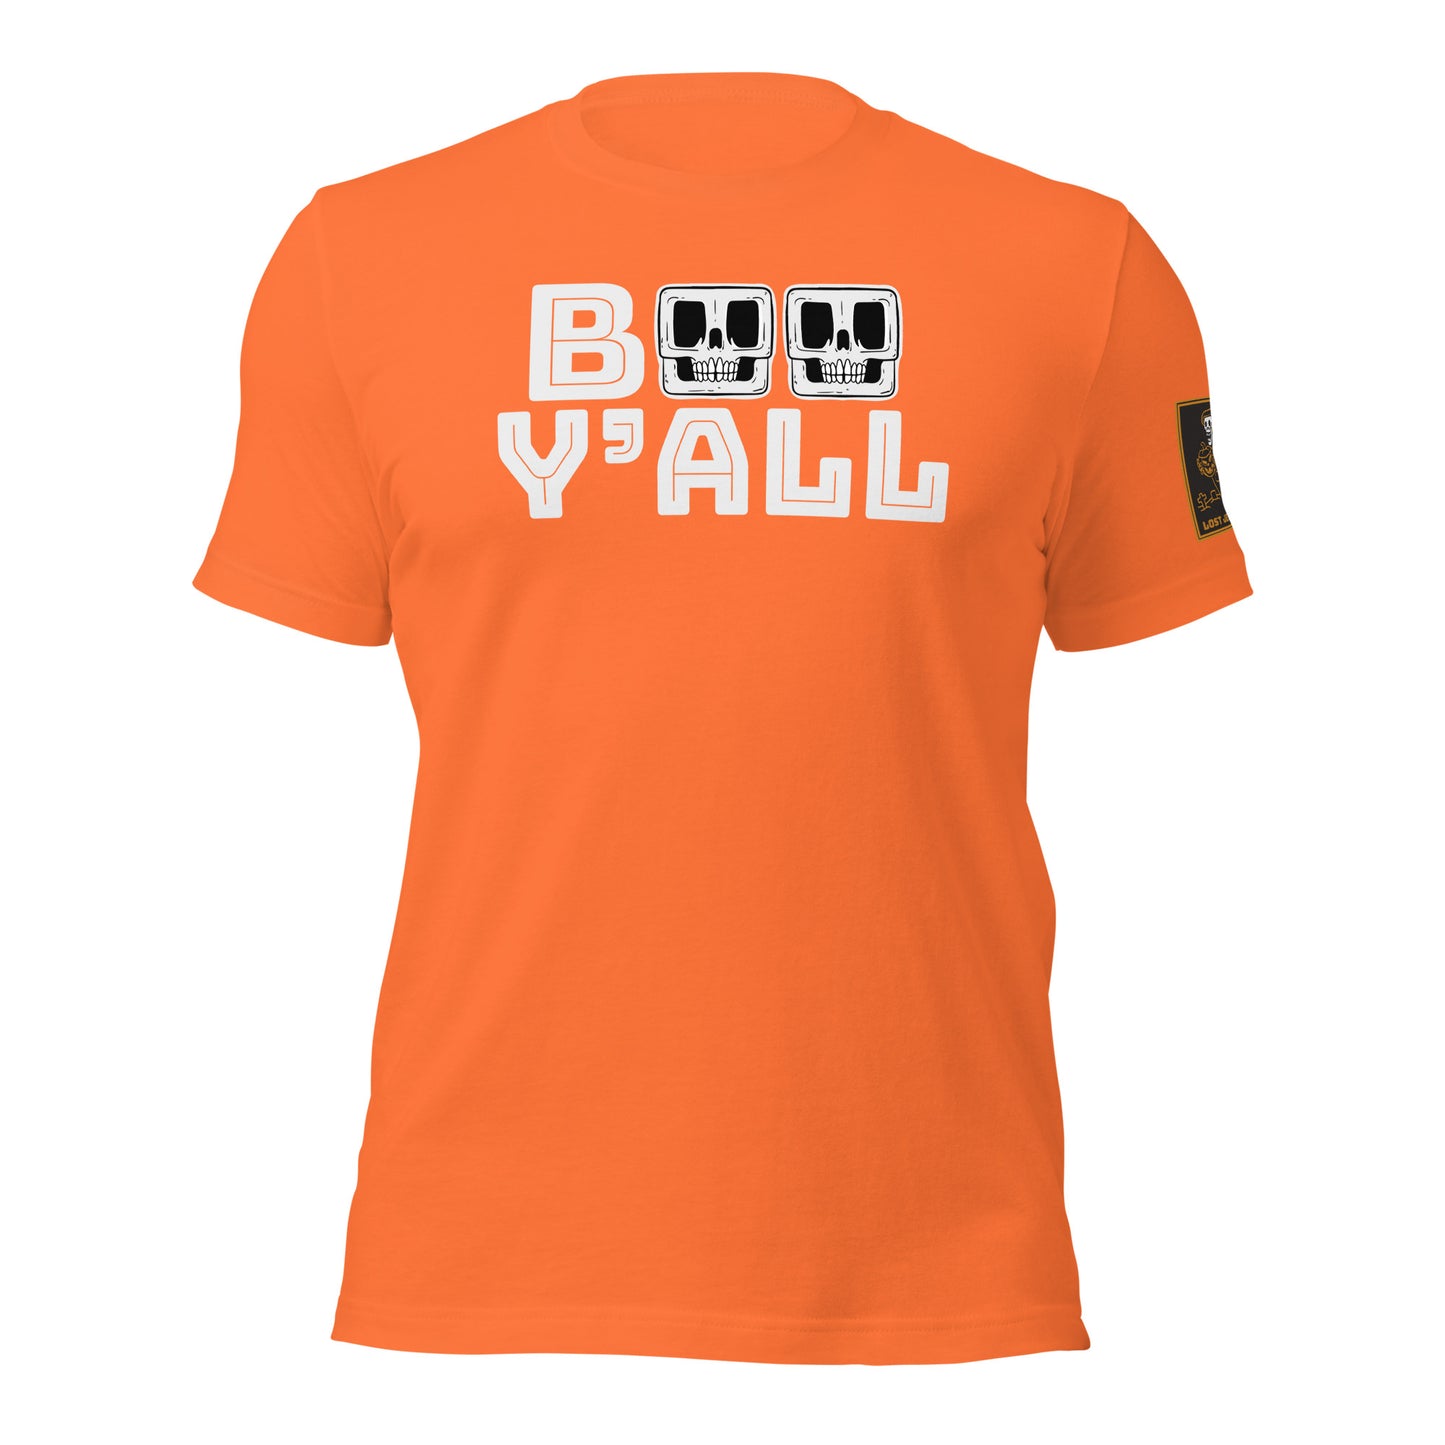 BOO Y'ALL - STANDARD - WHITE FONT - BELLA+CANVAS - Unisex t-shirt